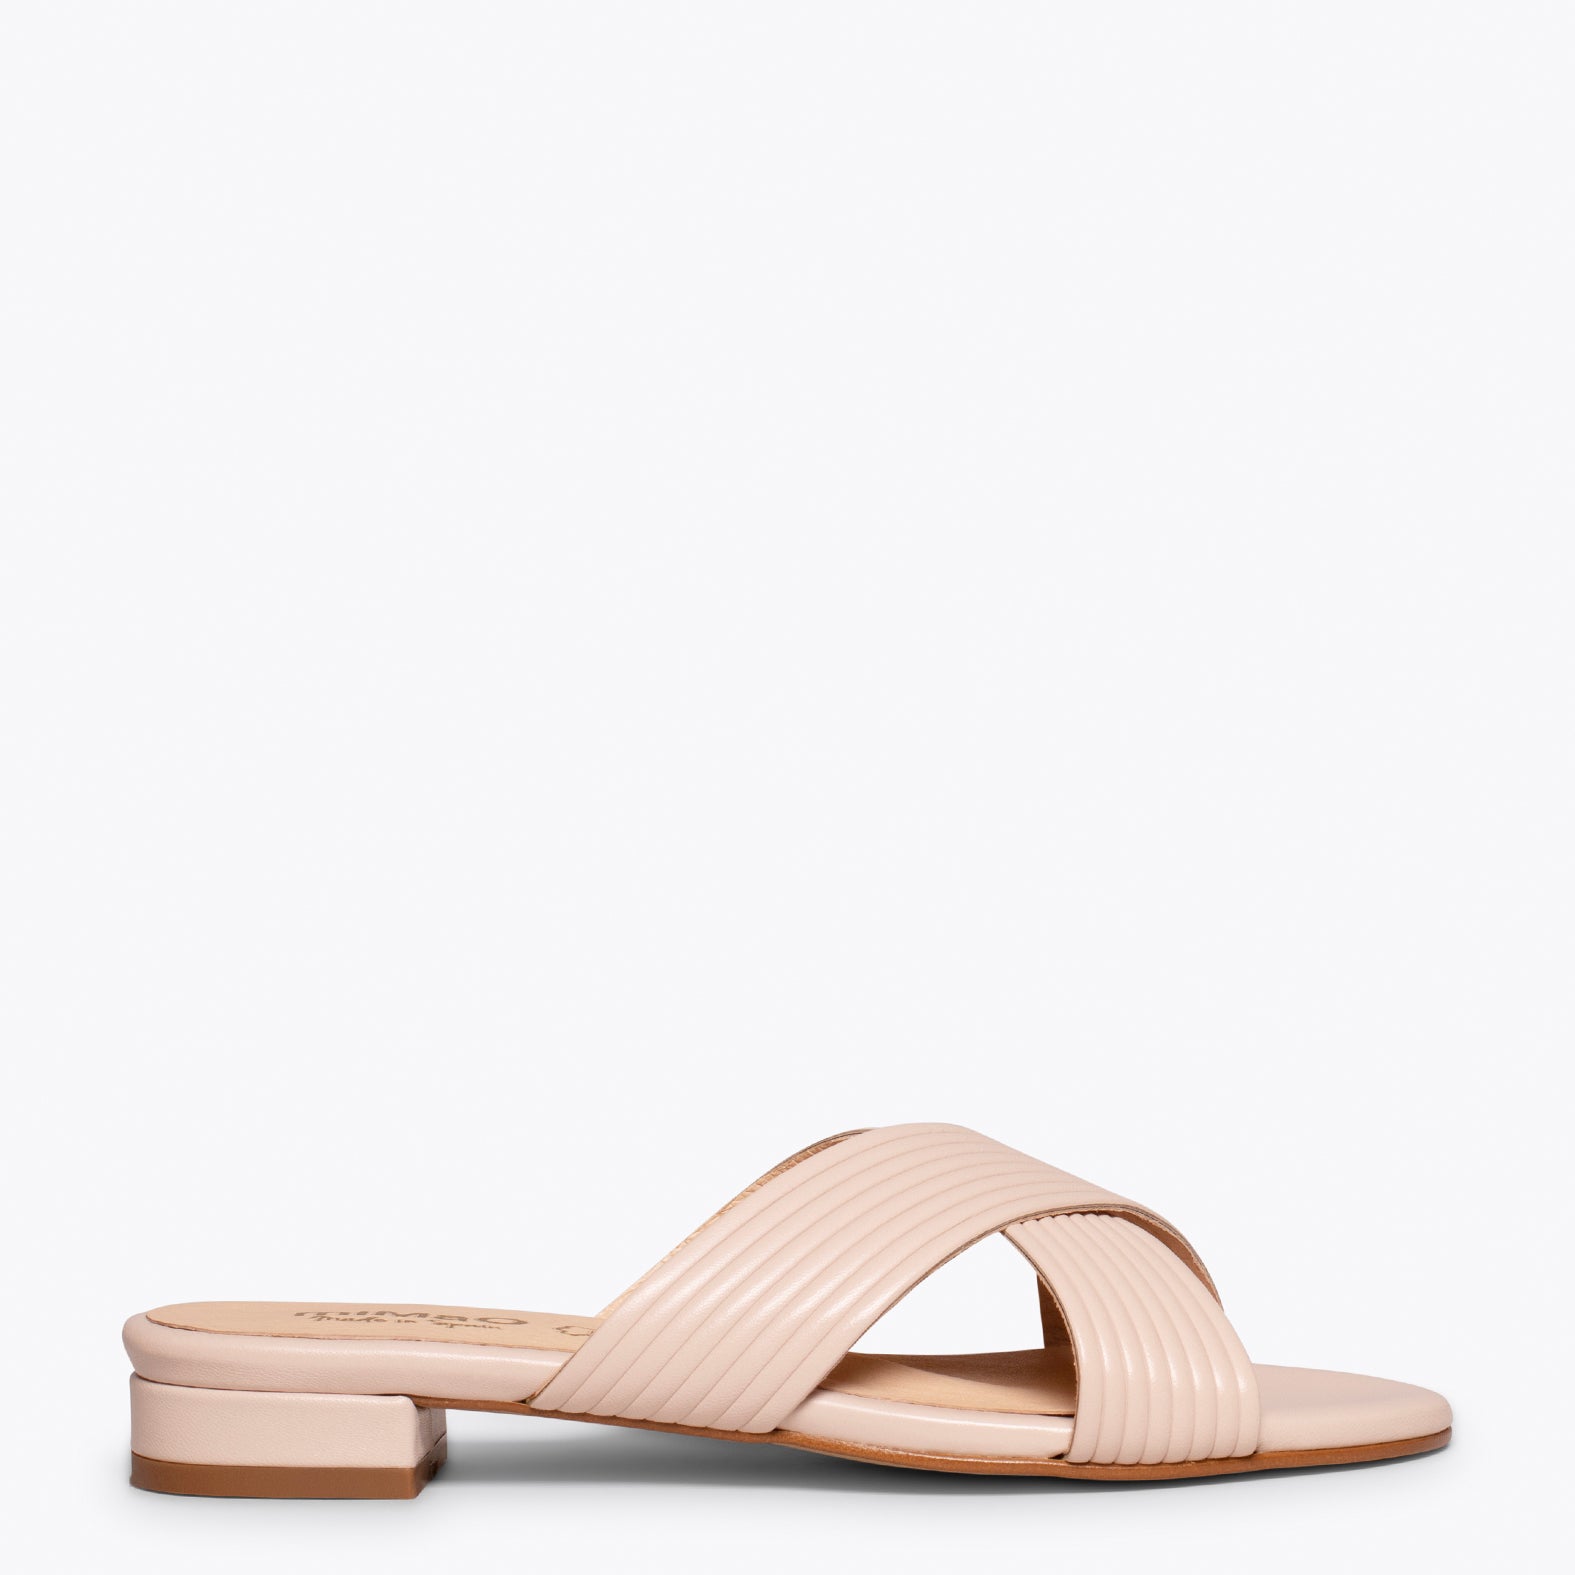 PALA – NUDE flat mules with cross straps